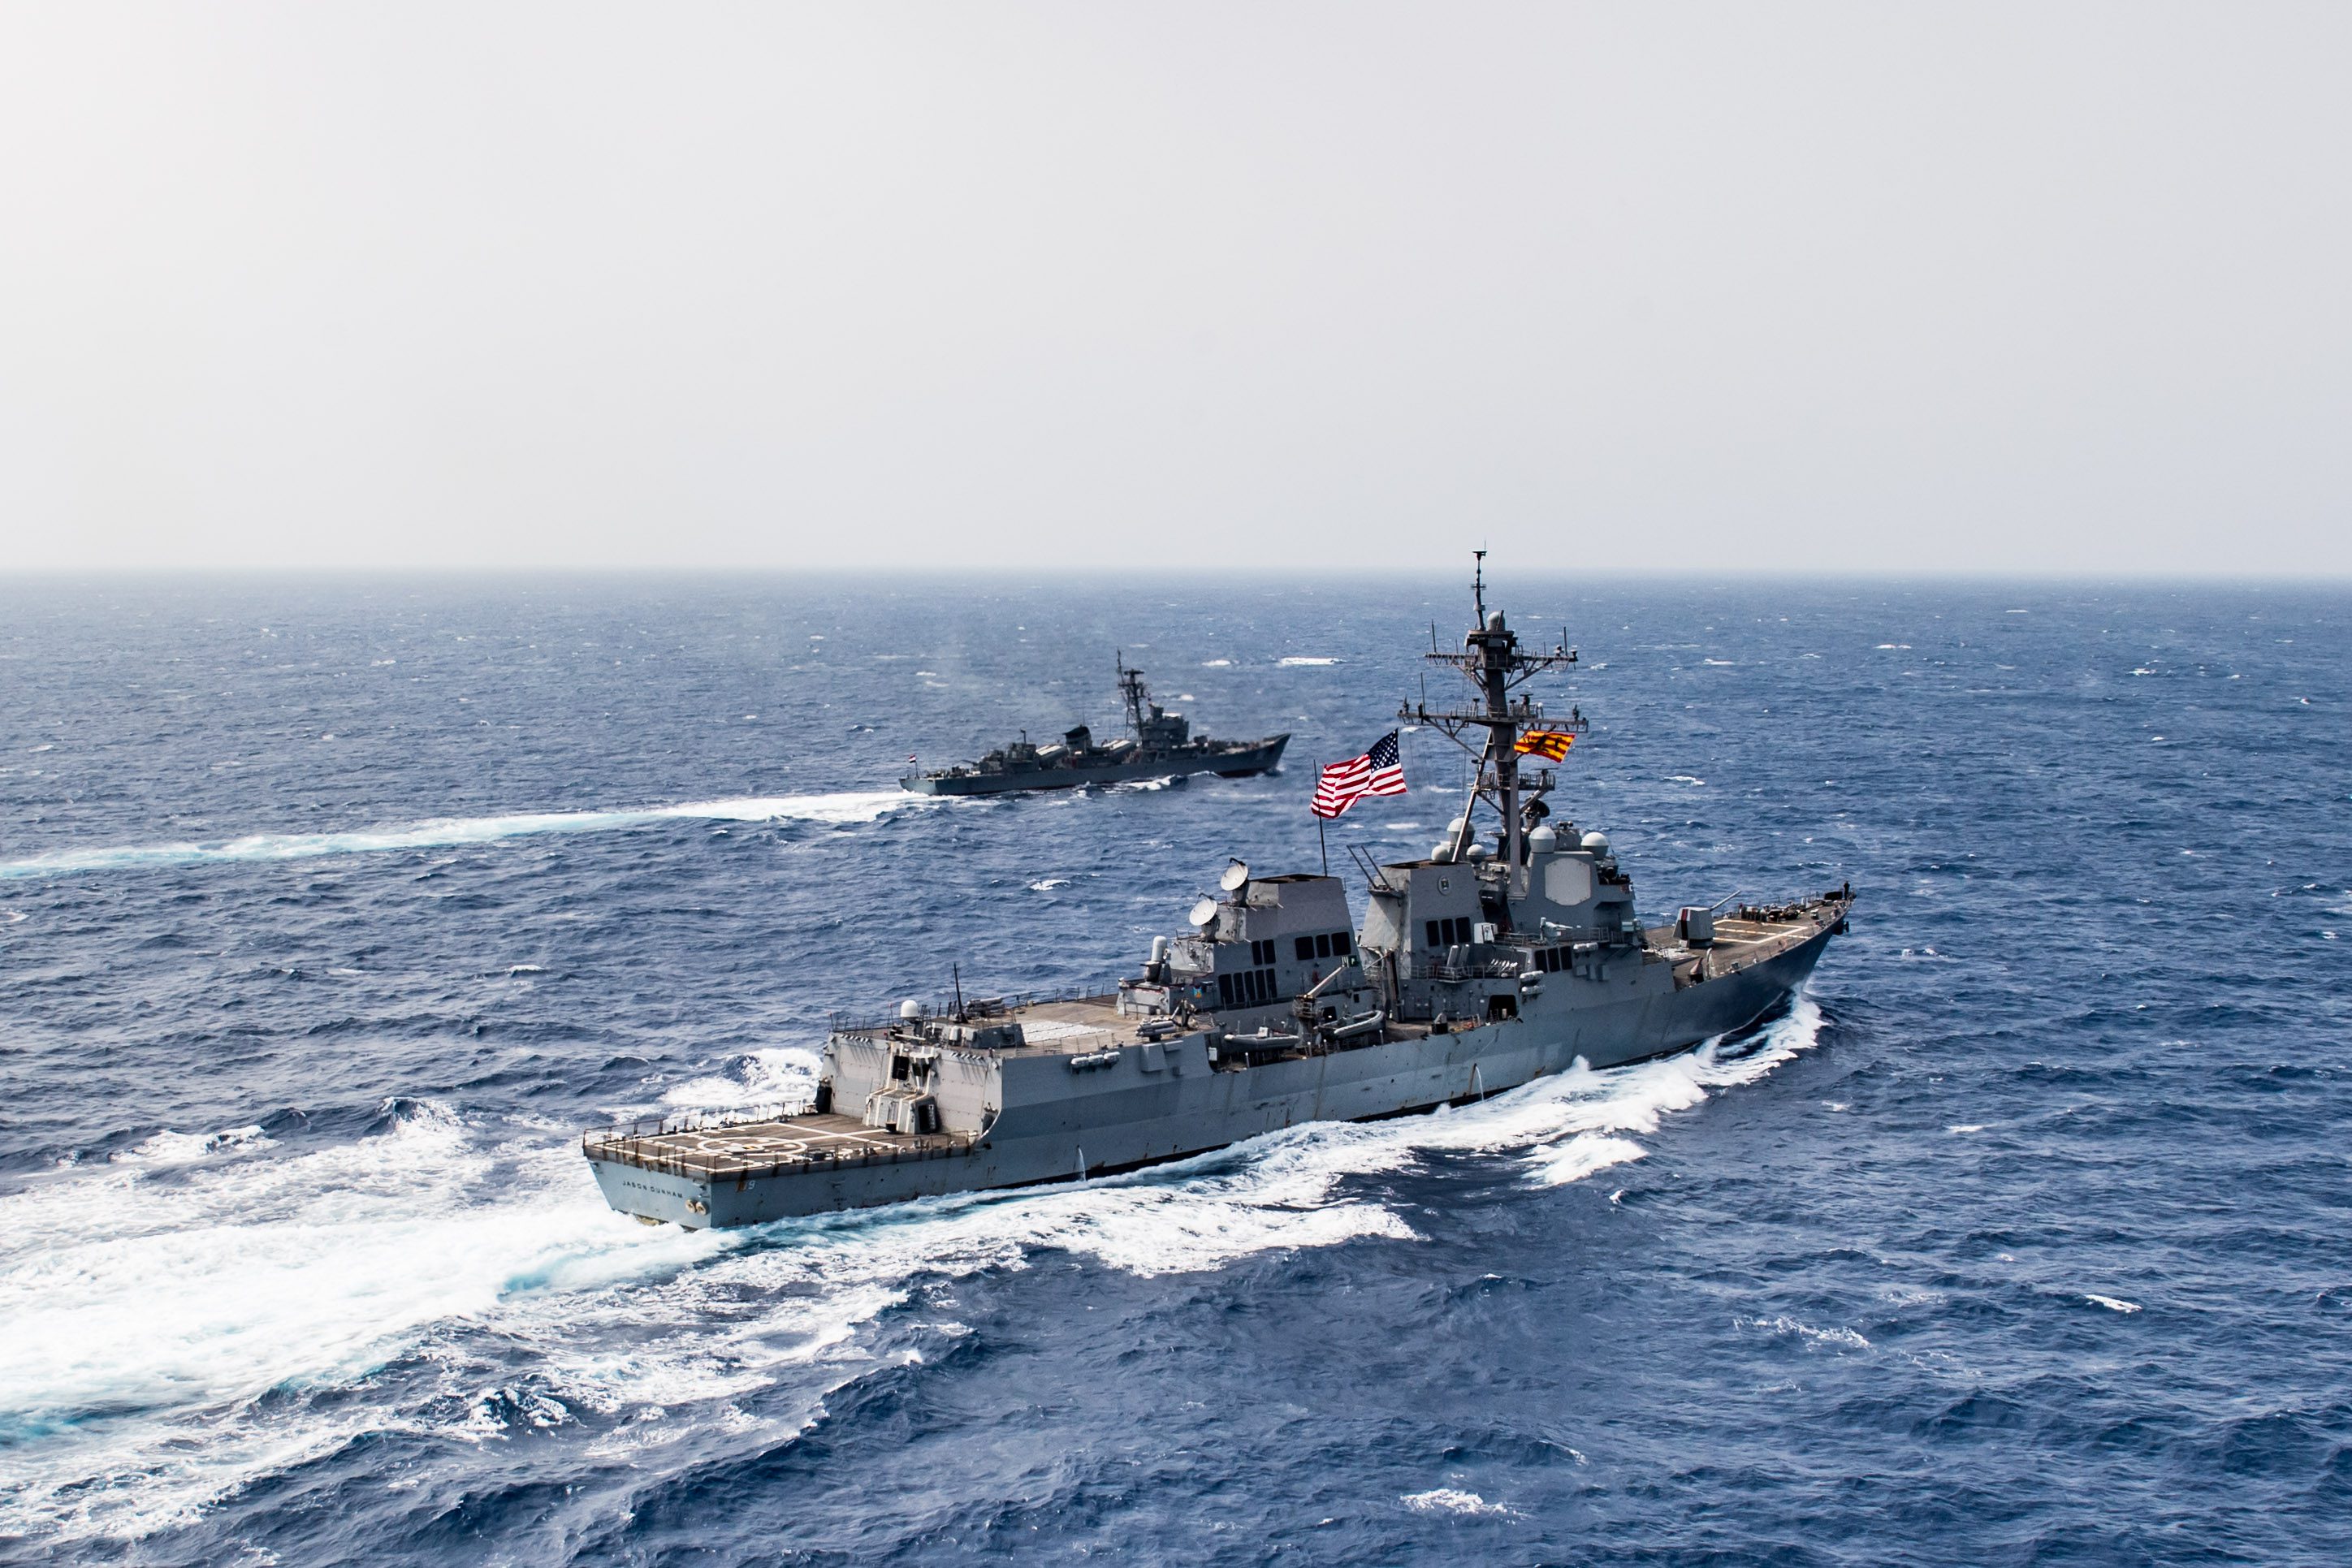 U.S. Navy Sailor Dies in Small Boat Accident in Red Sea